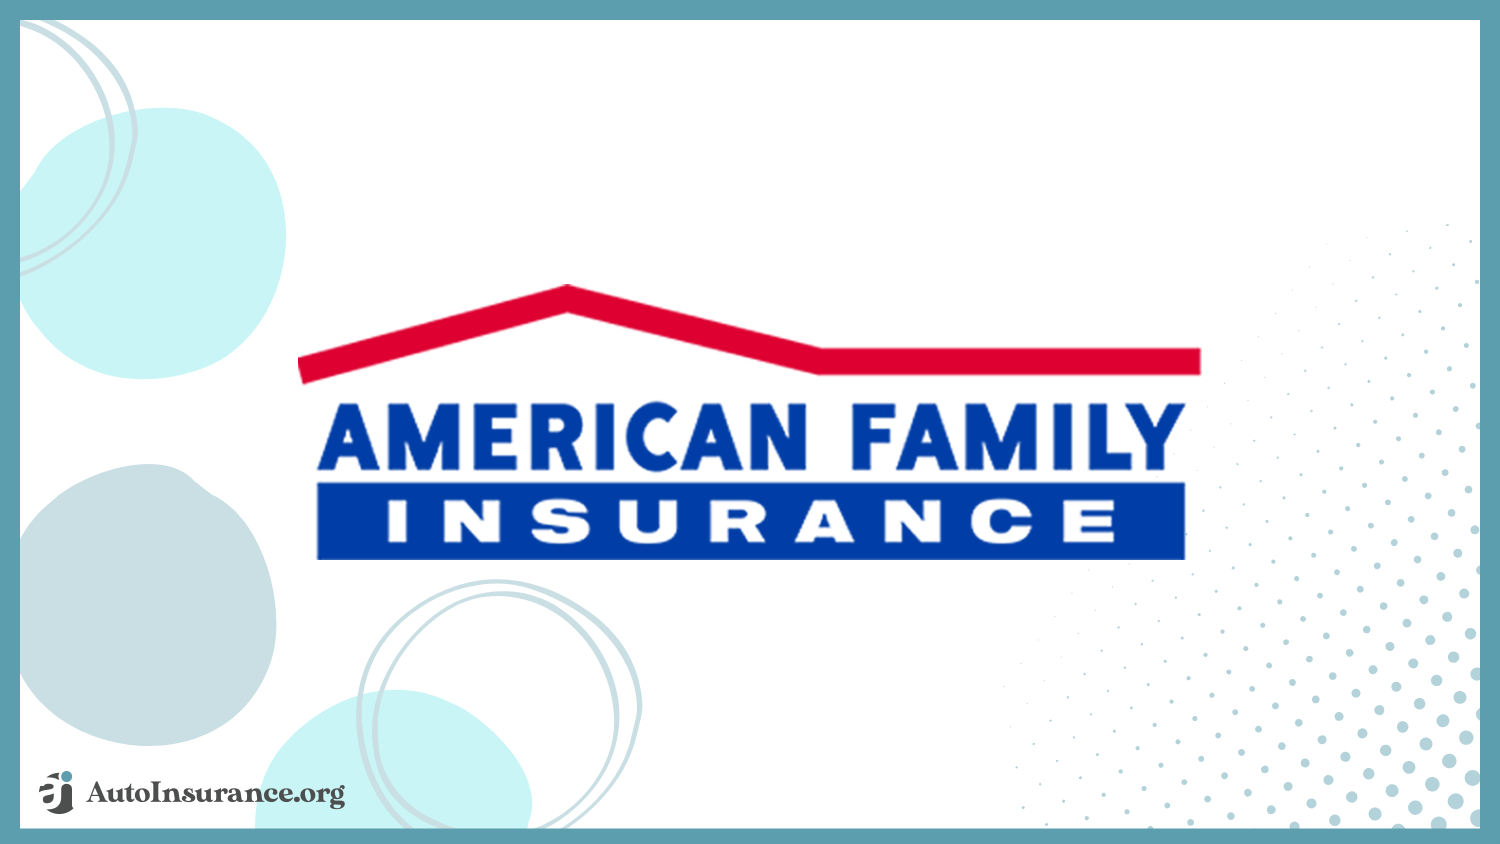 American Family: Best Auto Insurance for International Drivers